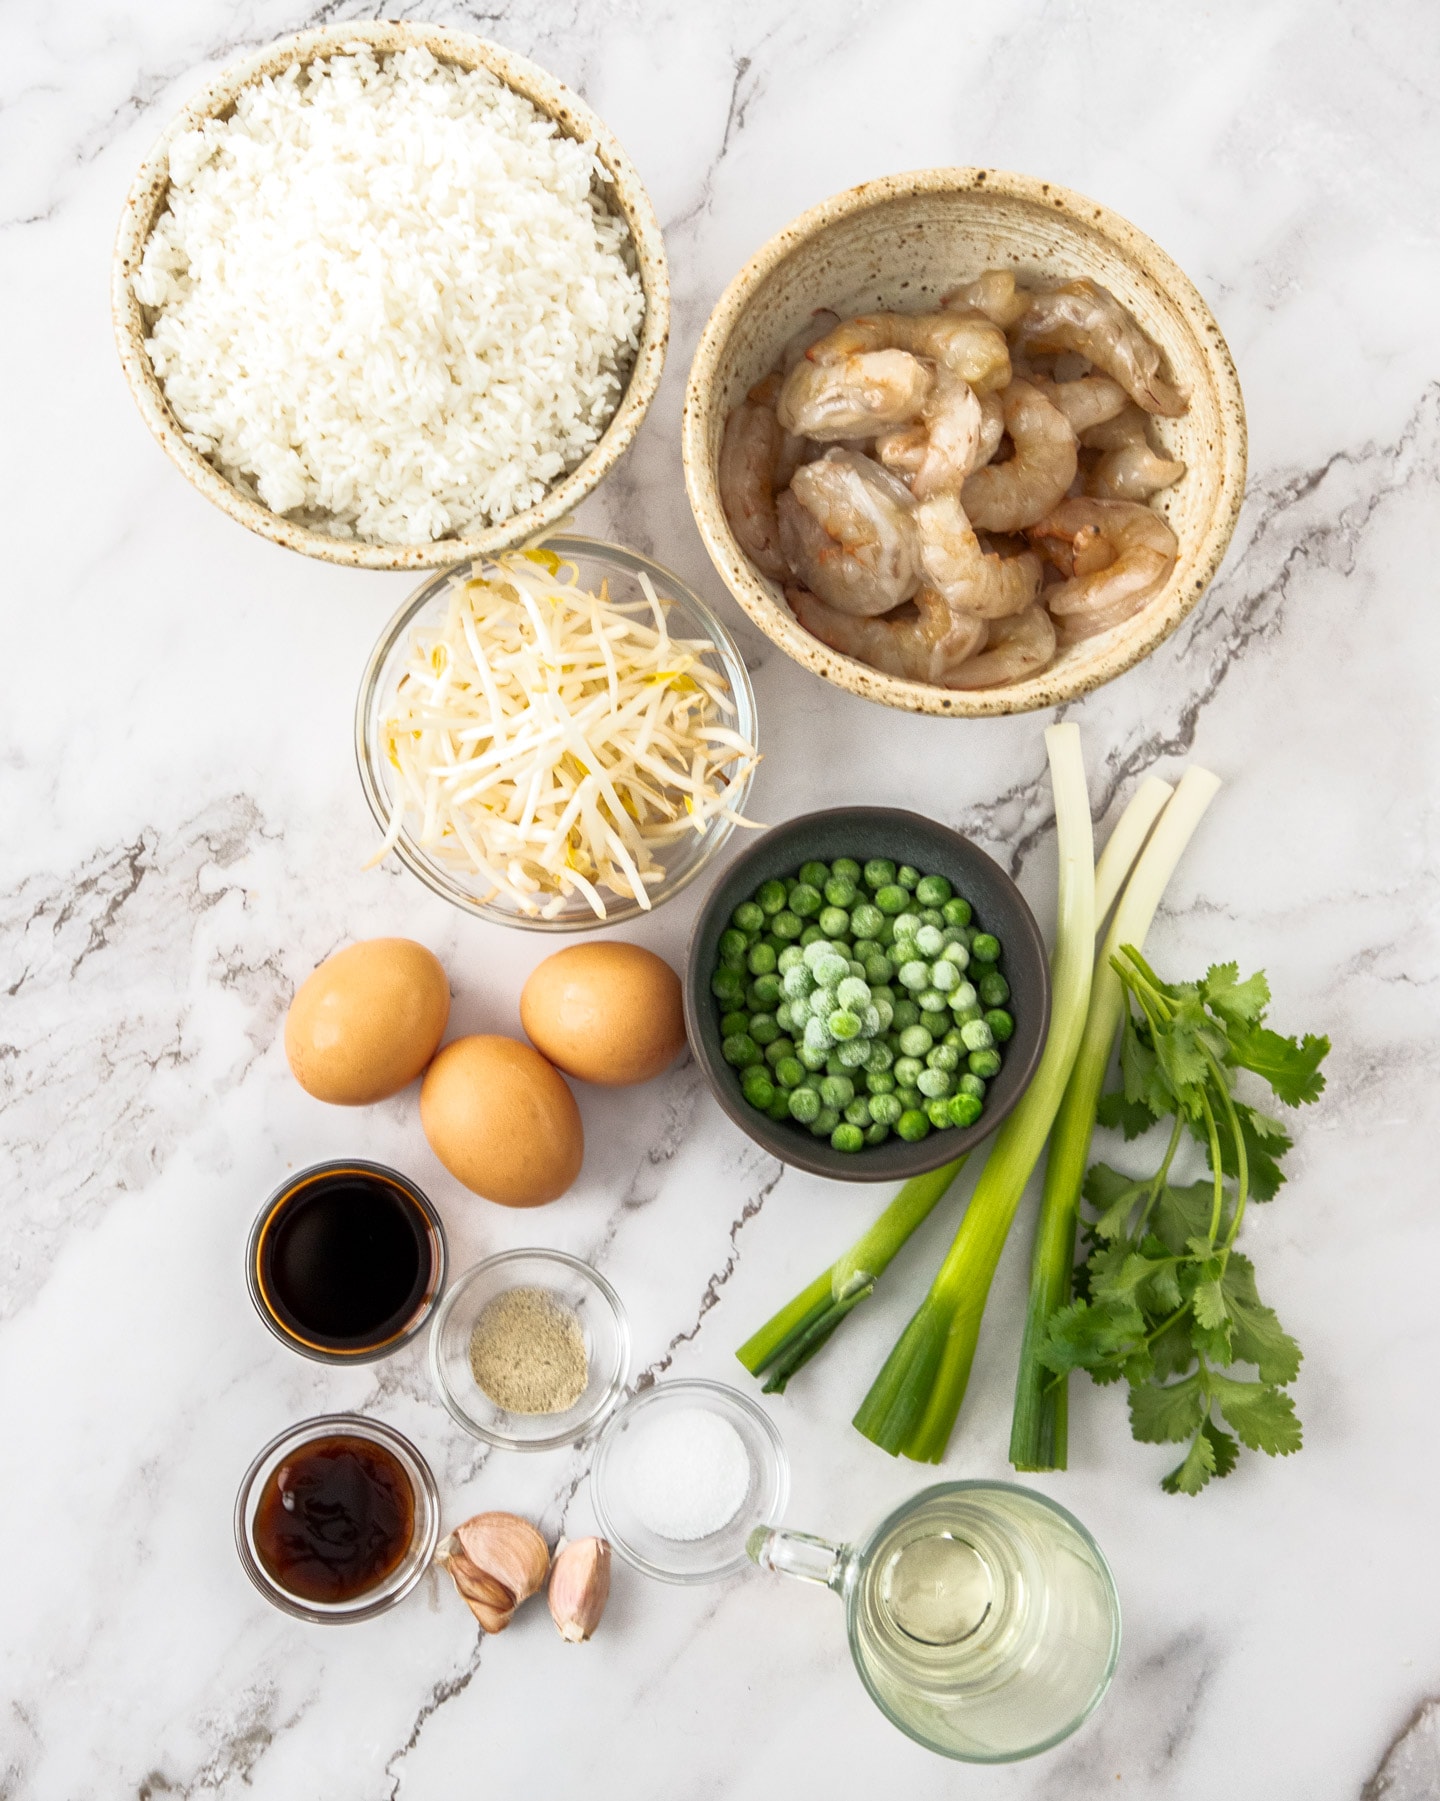 Ingredients for prawn fried rice on a marble background.